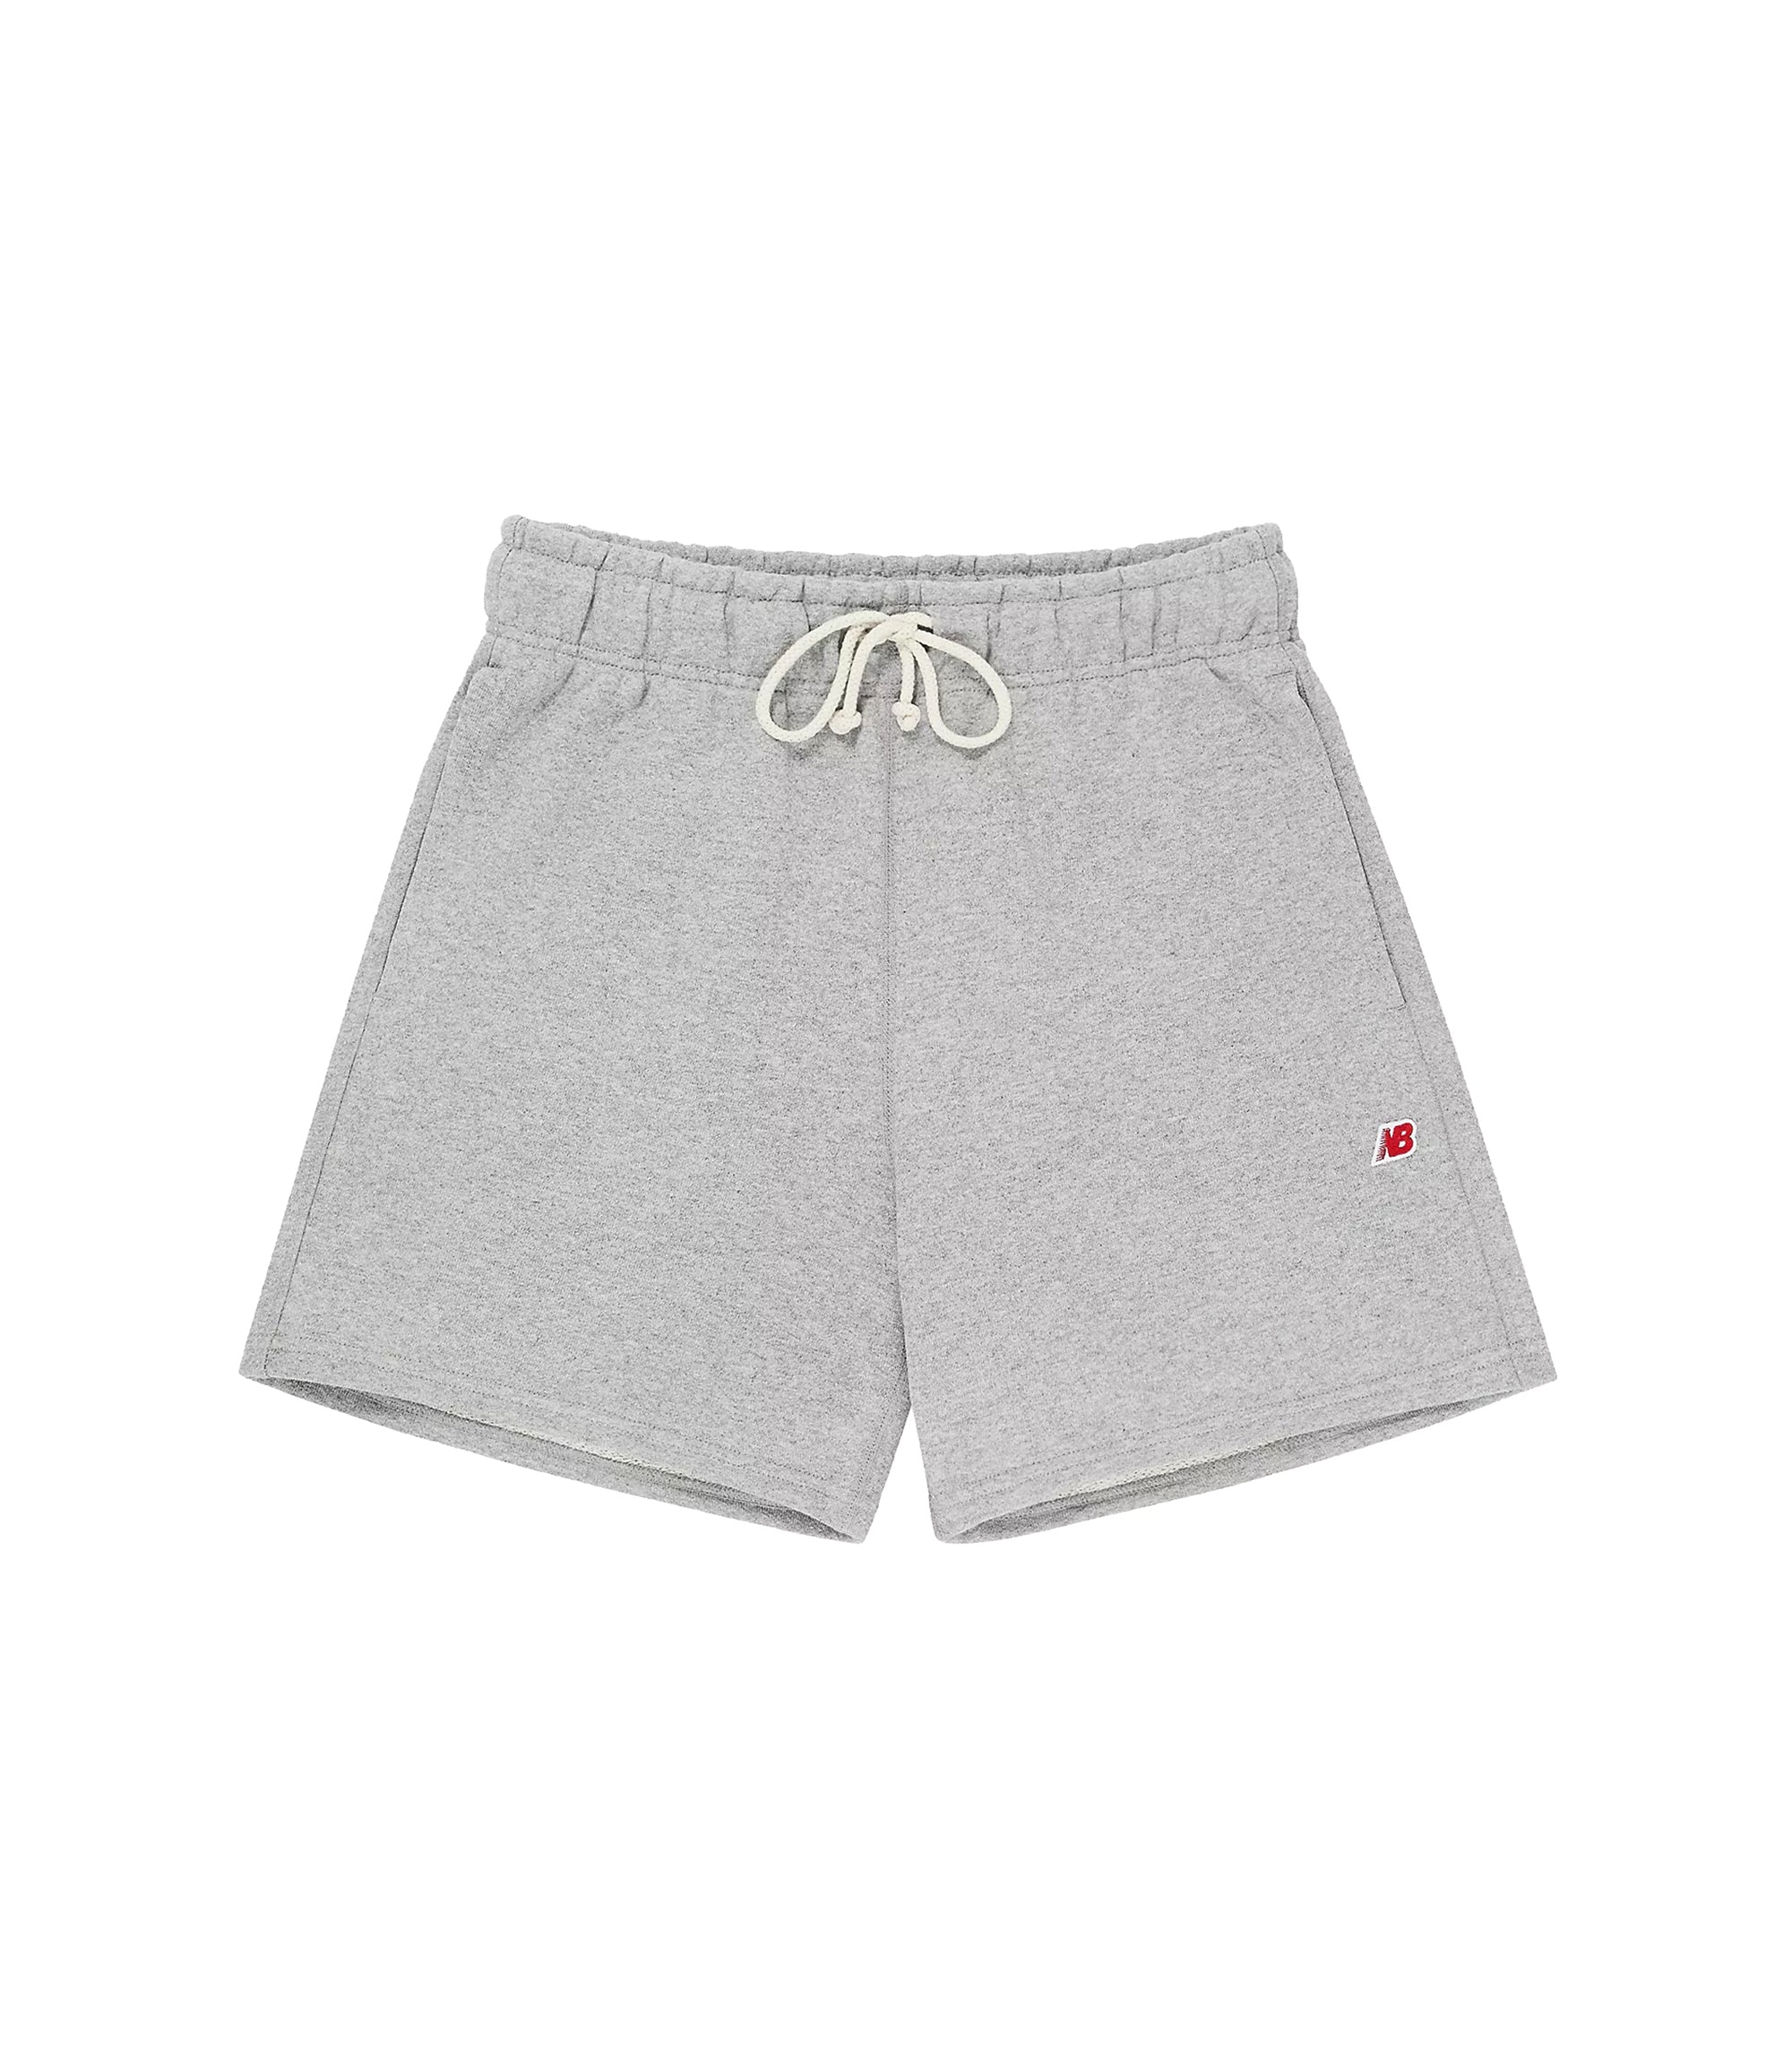 Made in USA Shorts - Athletic Grey